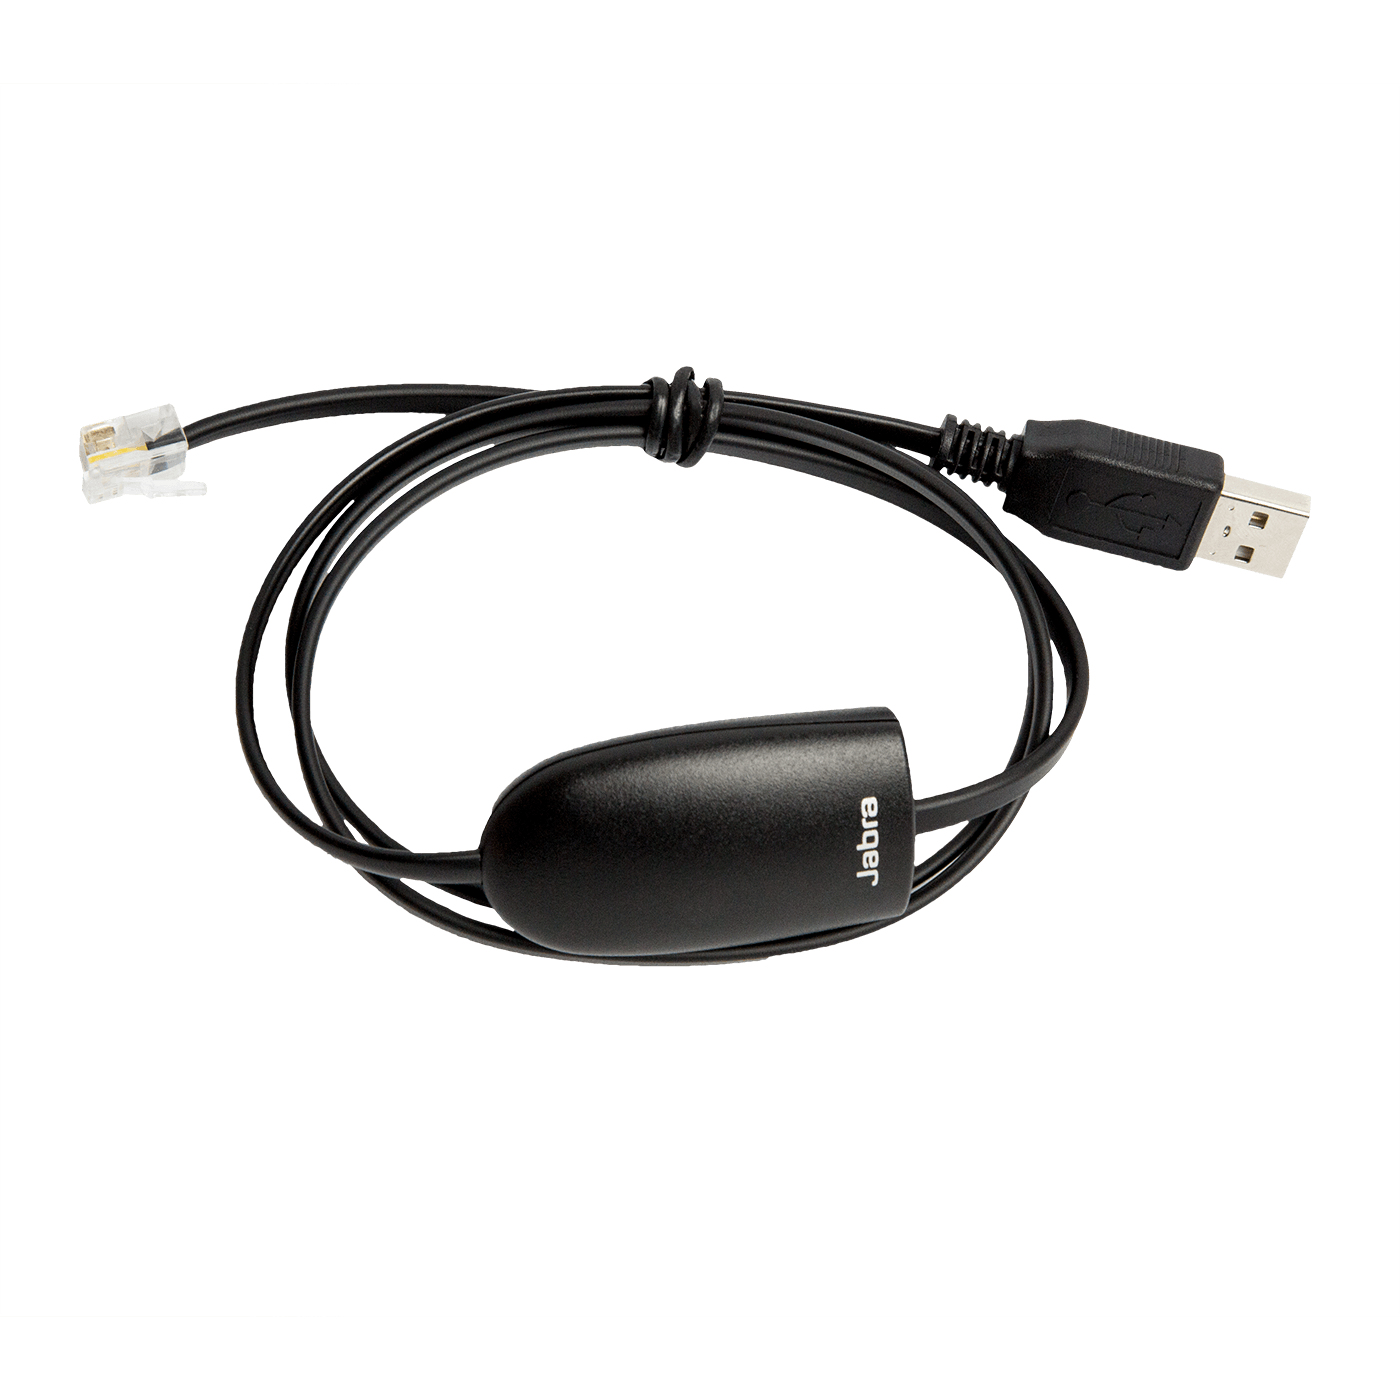 Photos - Cable (video, audio, USB) Jabra Service cable for Pro 920 14201-29 